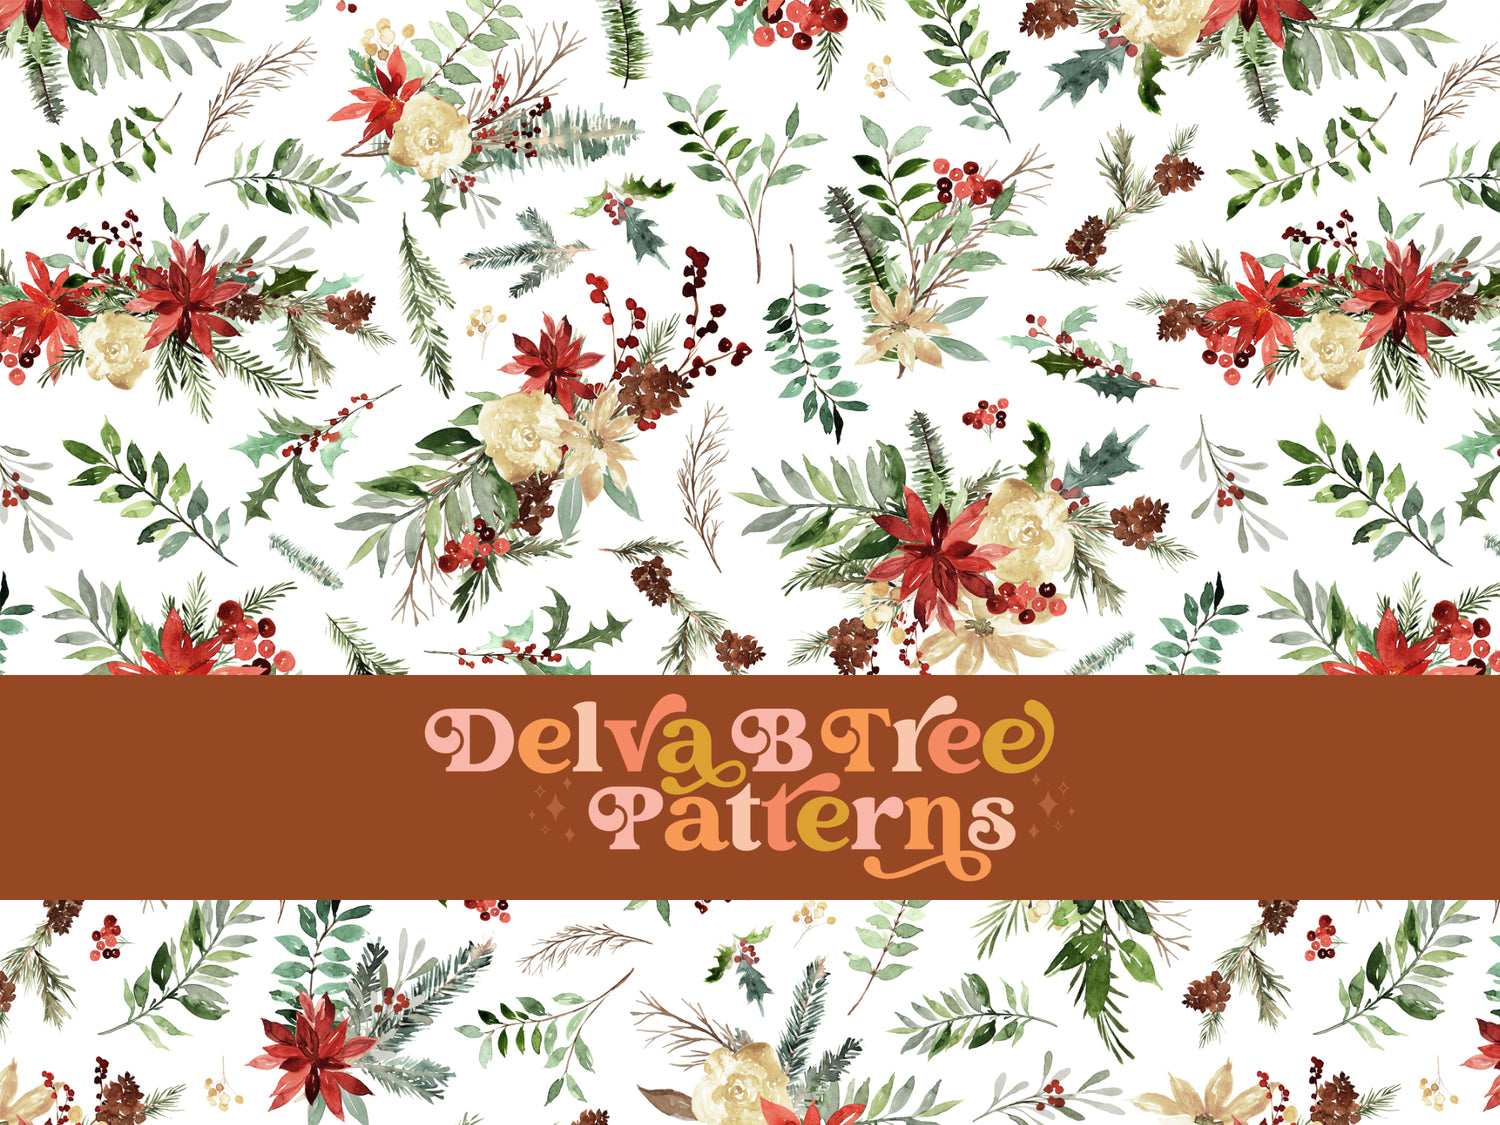 Tossed red watercolor poinsettias, off white flowers, pinecones, holly leaves, mistletoe and winter berries seamless file for fabric printing. Winter Floral Repeat Pattern for textiles, polymailers, baby boy lovey blankets, nursery crib bedding, kids clothing, girls hair accessories, home decor accents, pet products.